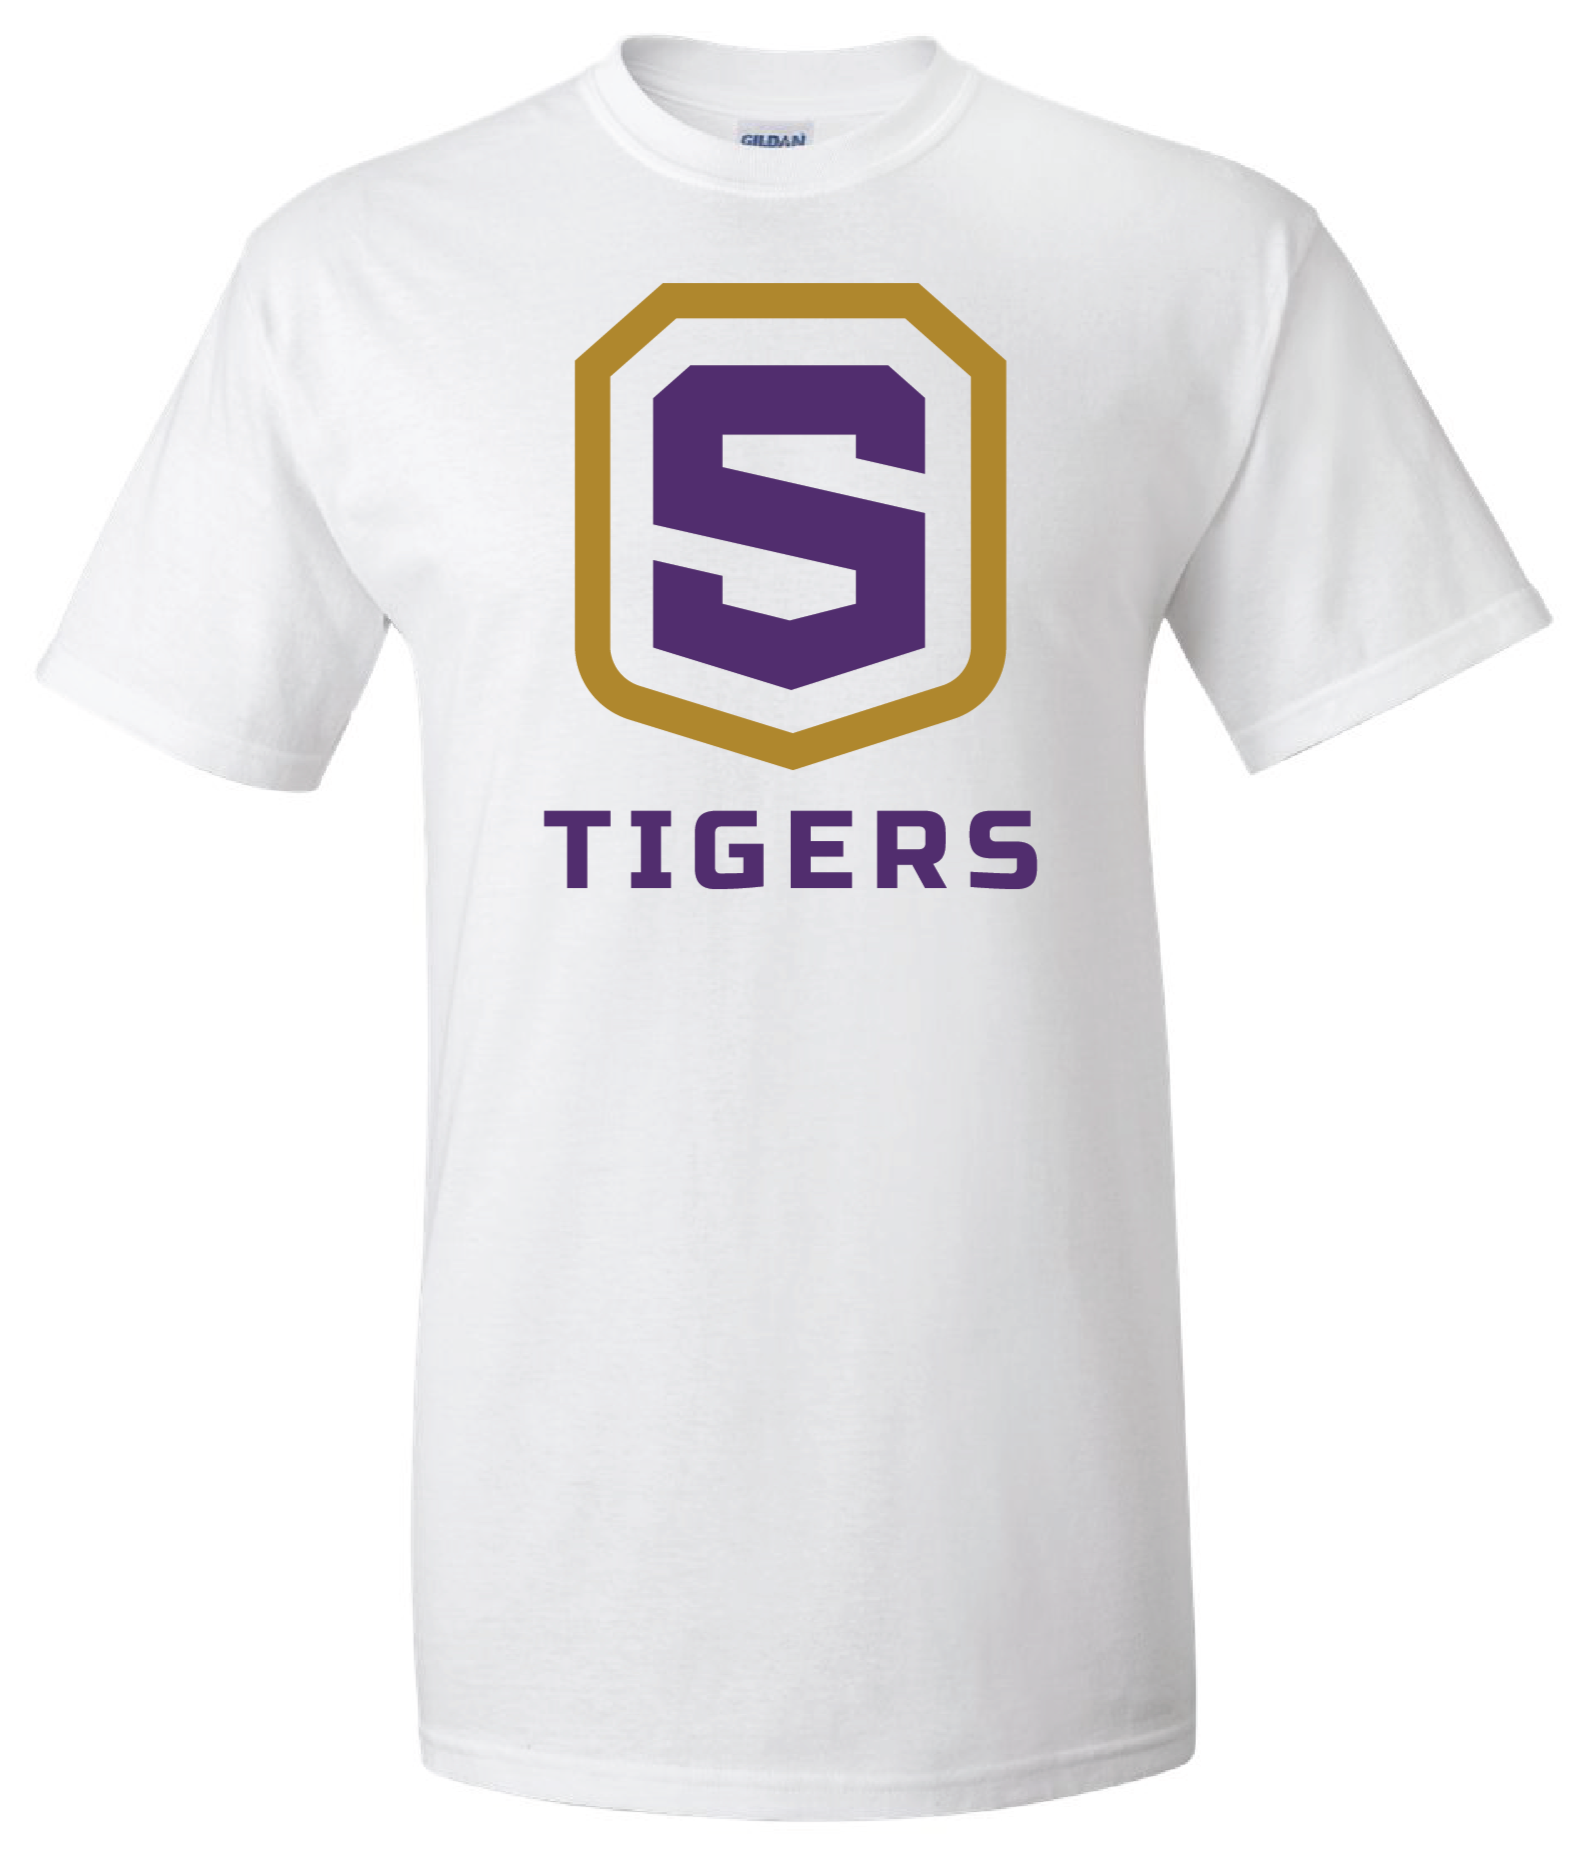 Adult White Cotton Short Sleeve T-Shirt | Tigers Shield